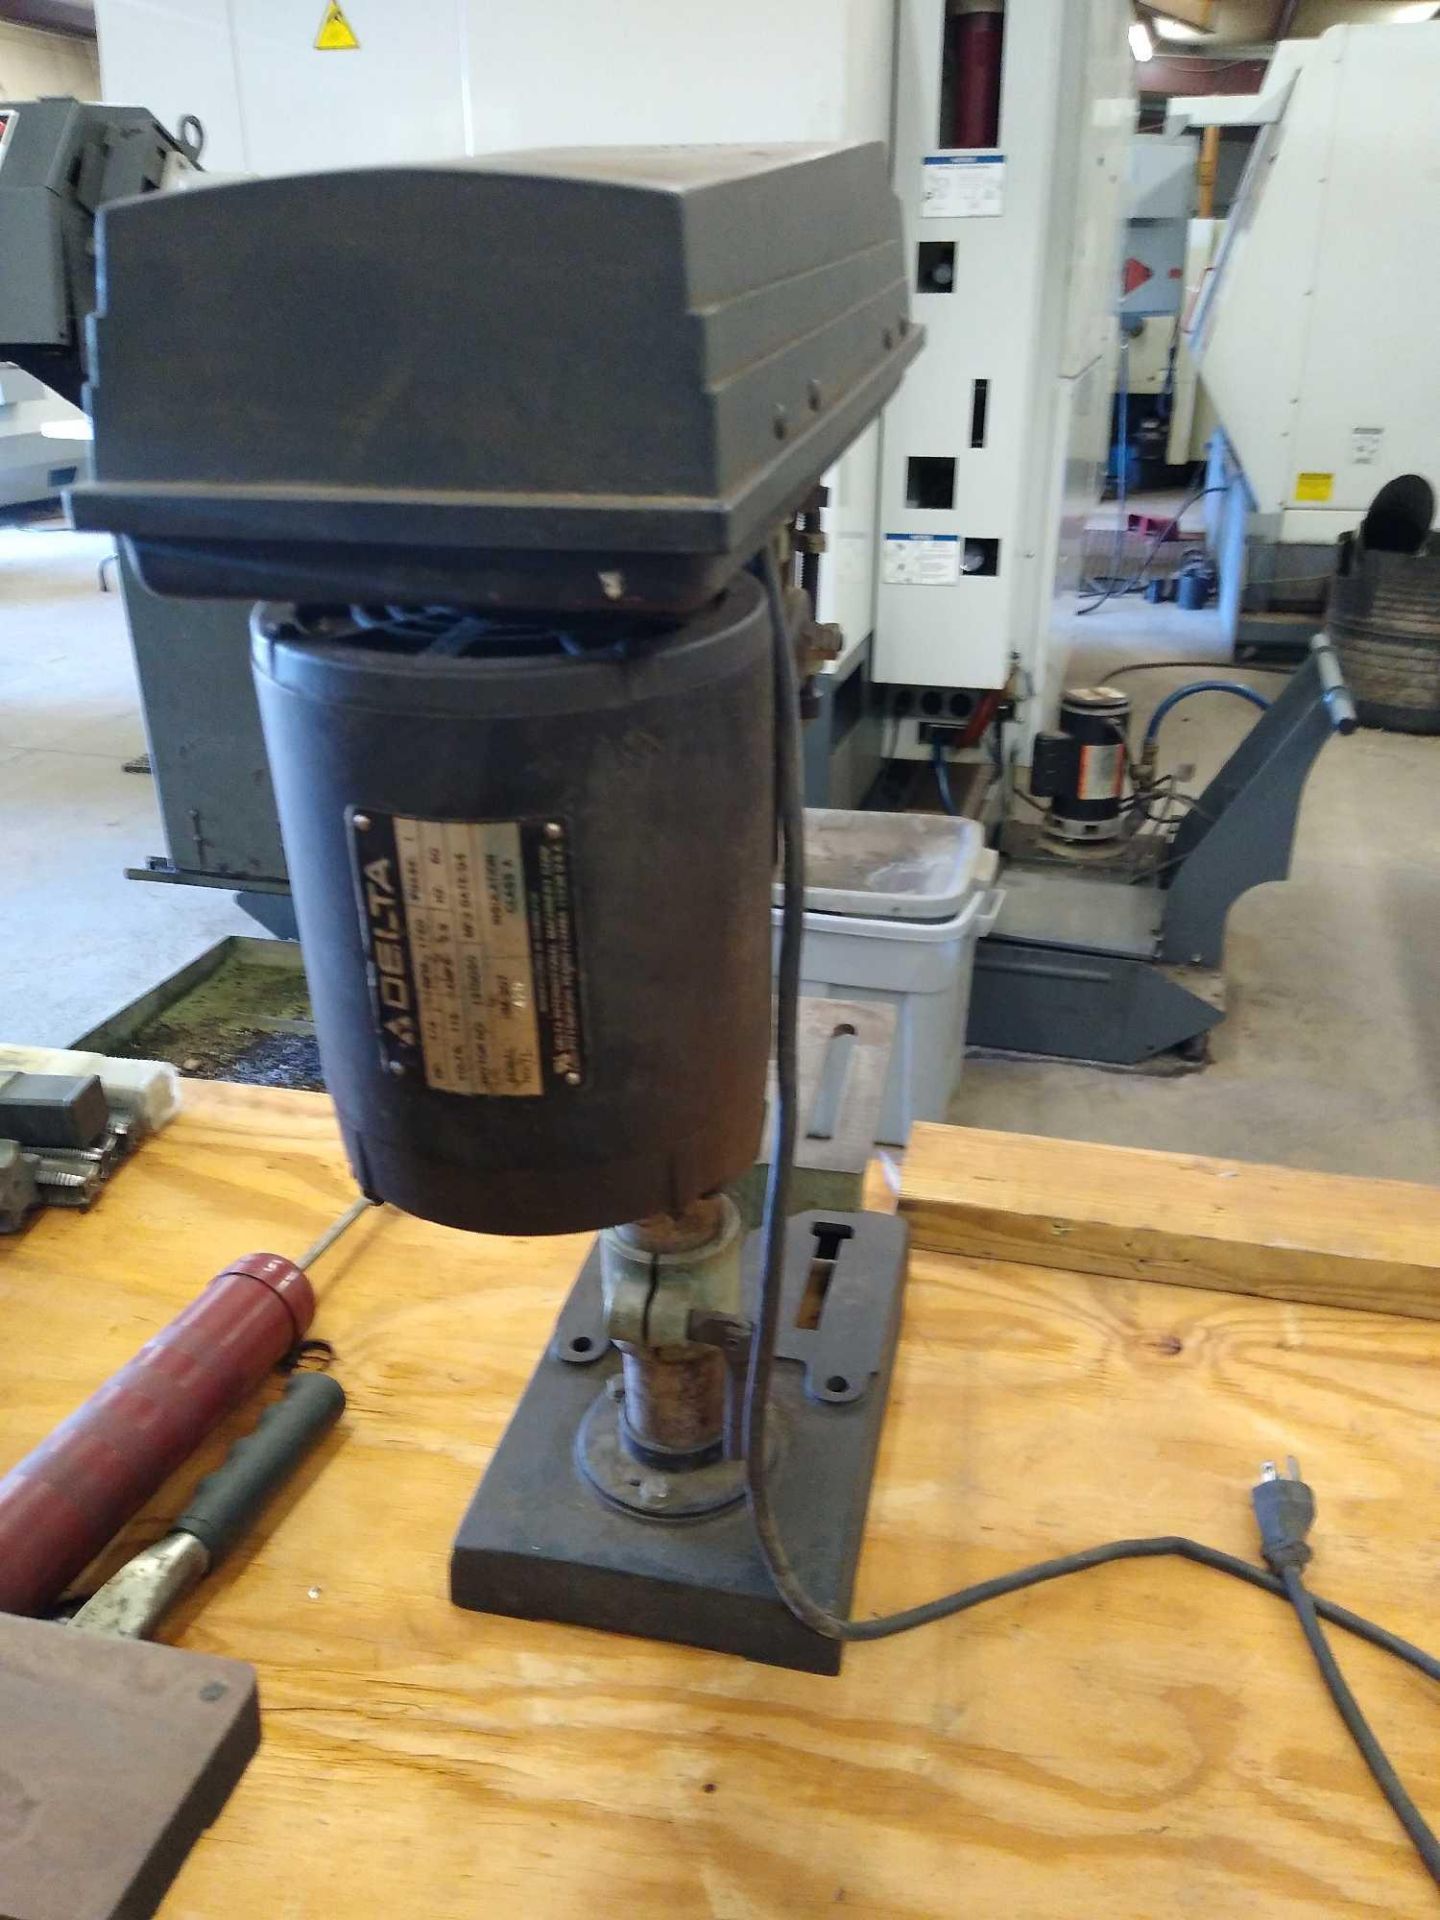 Delta Model 11-950 Bench Top Drill Press Manufacturer: Delta Model: 11-950 S/N: R 9420 Year: 1994 Th - Image 6 of 11